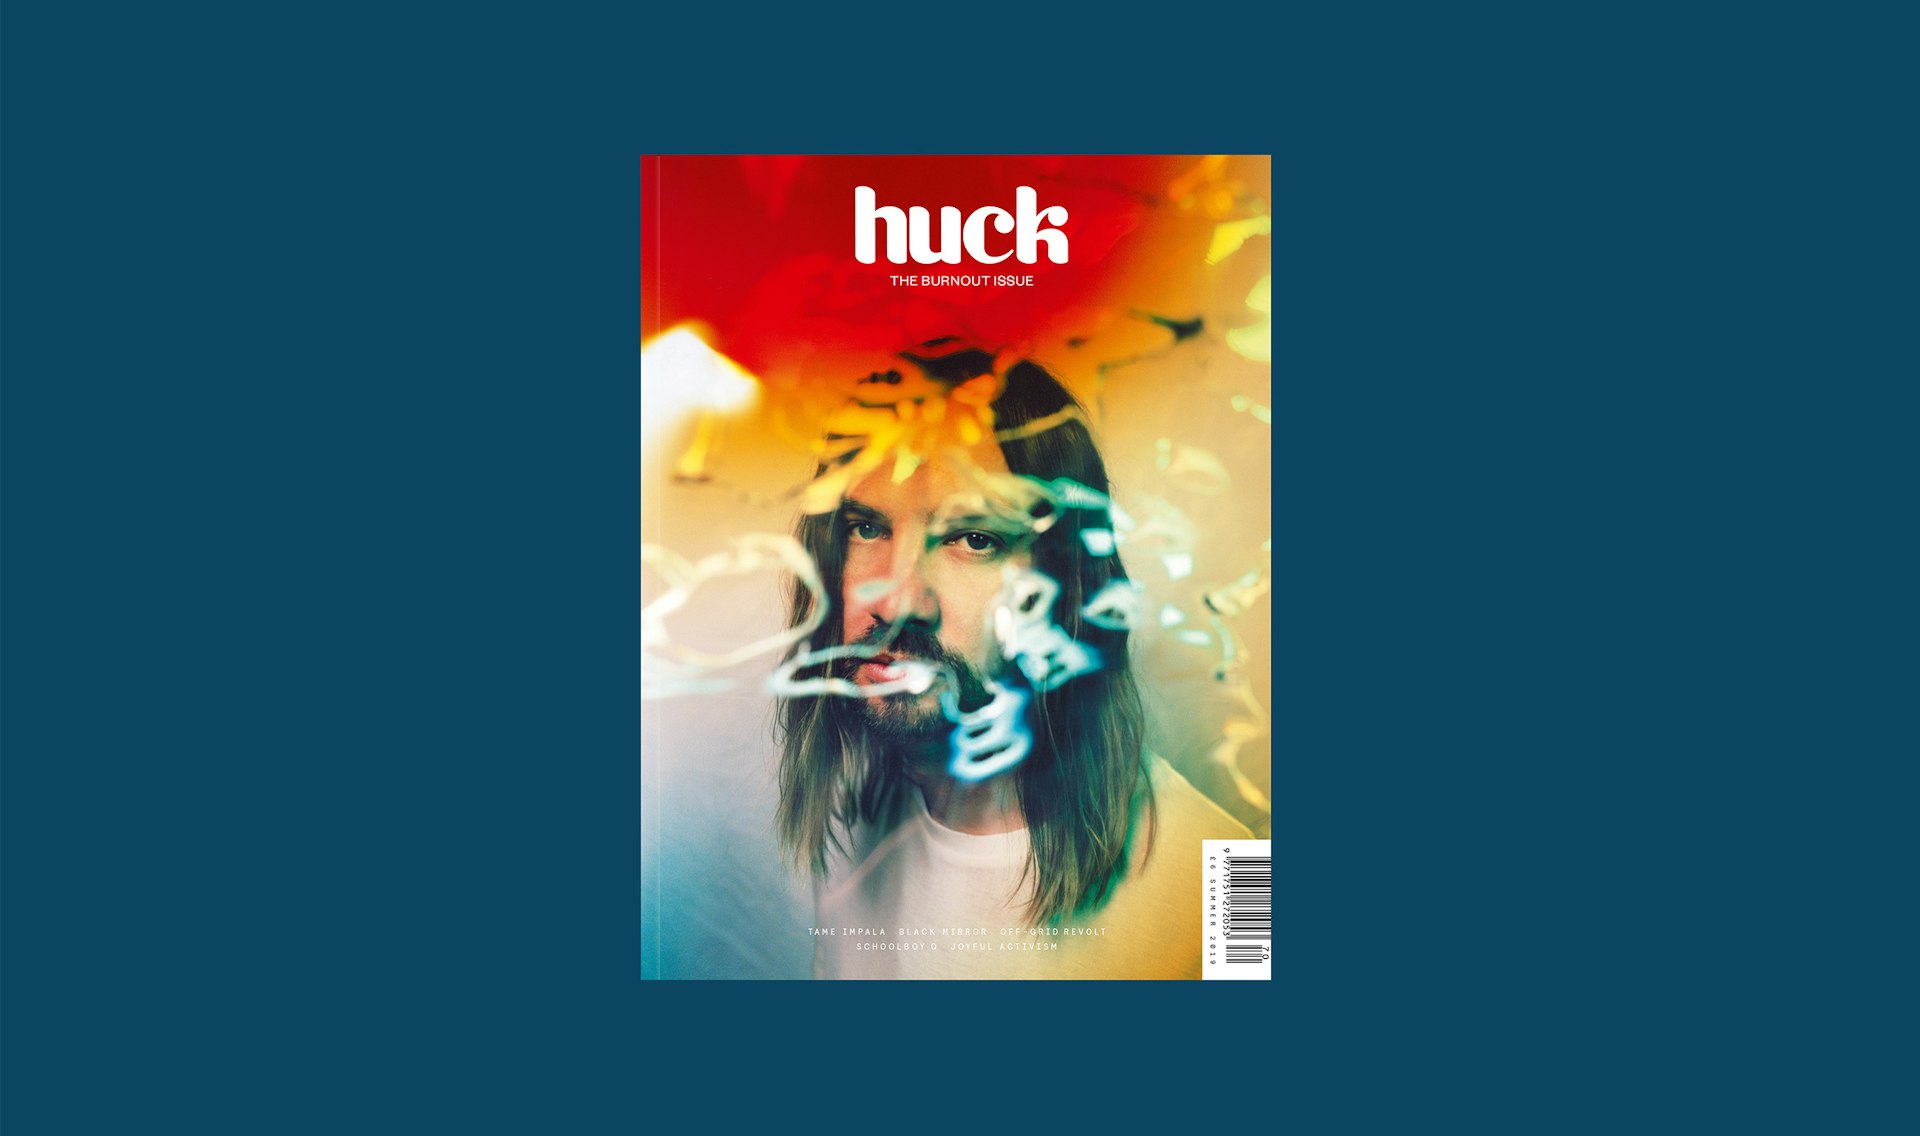 Huck: The Burnout Issue